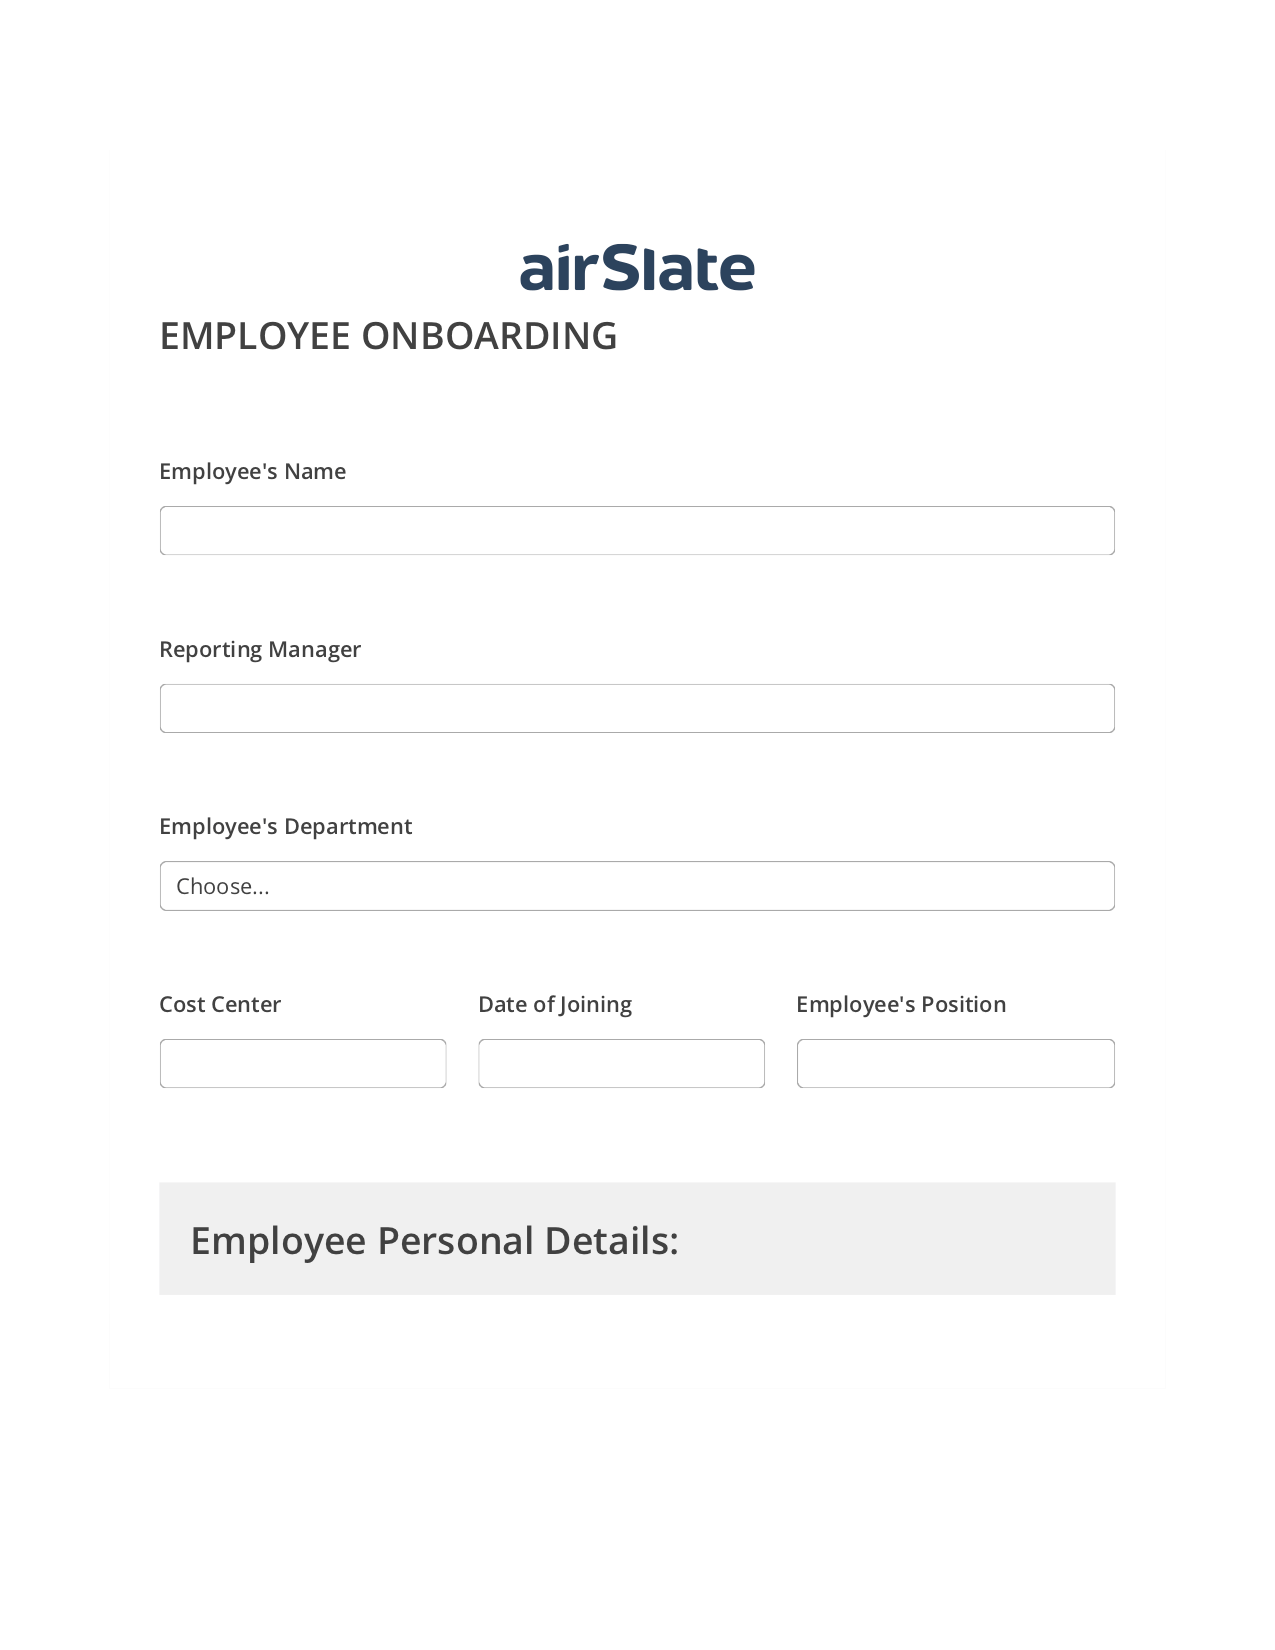 Employee Onboarding Workflow Pre-fill from CSV File Bot, Mailchimp send Campaign bot, Archive to OneDrive Bot